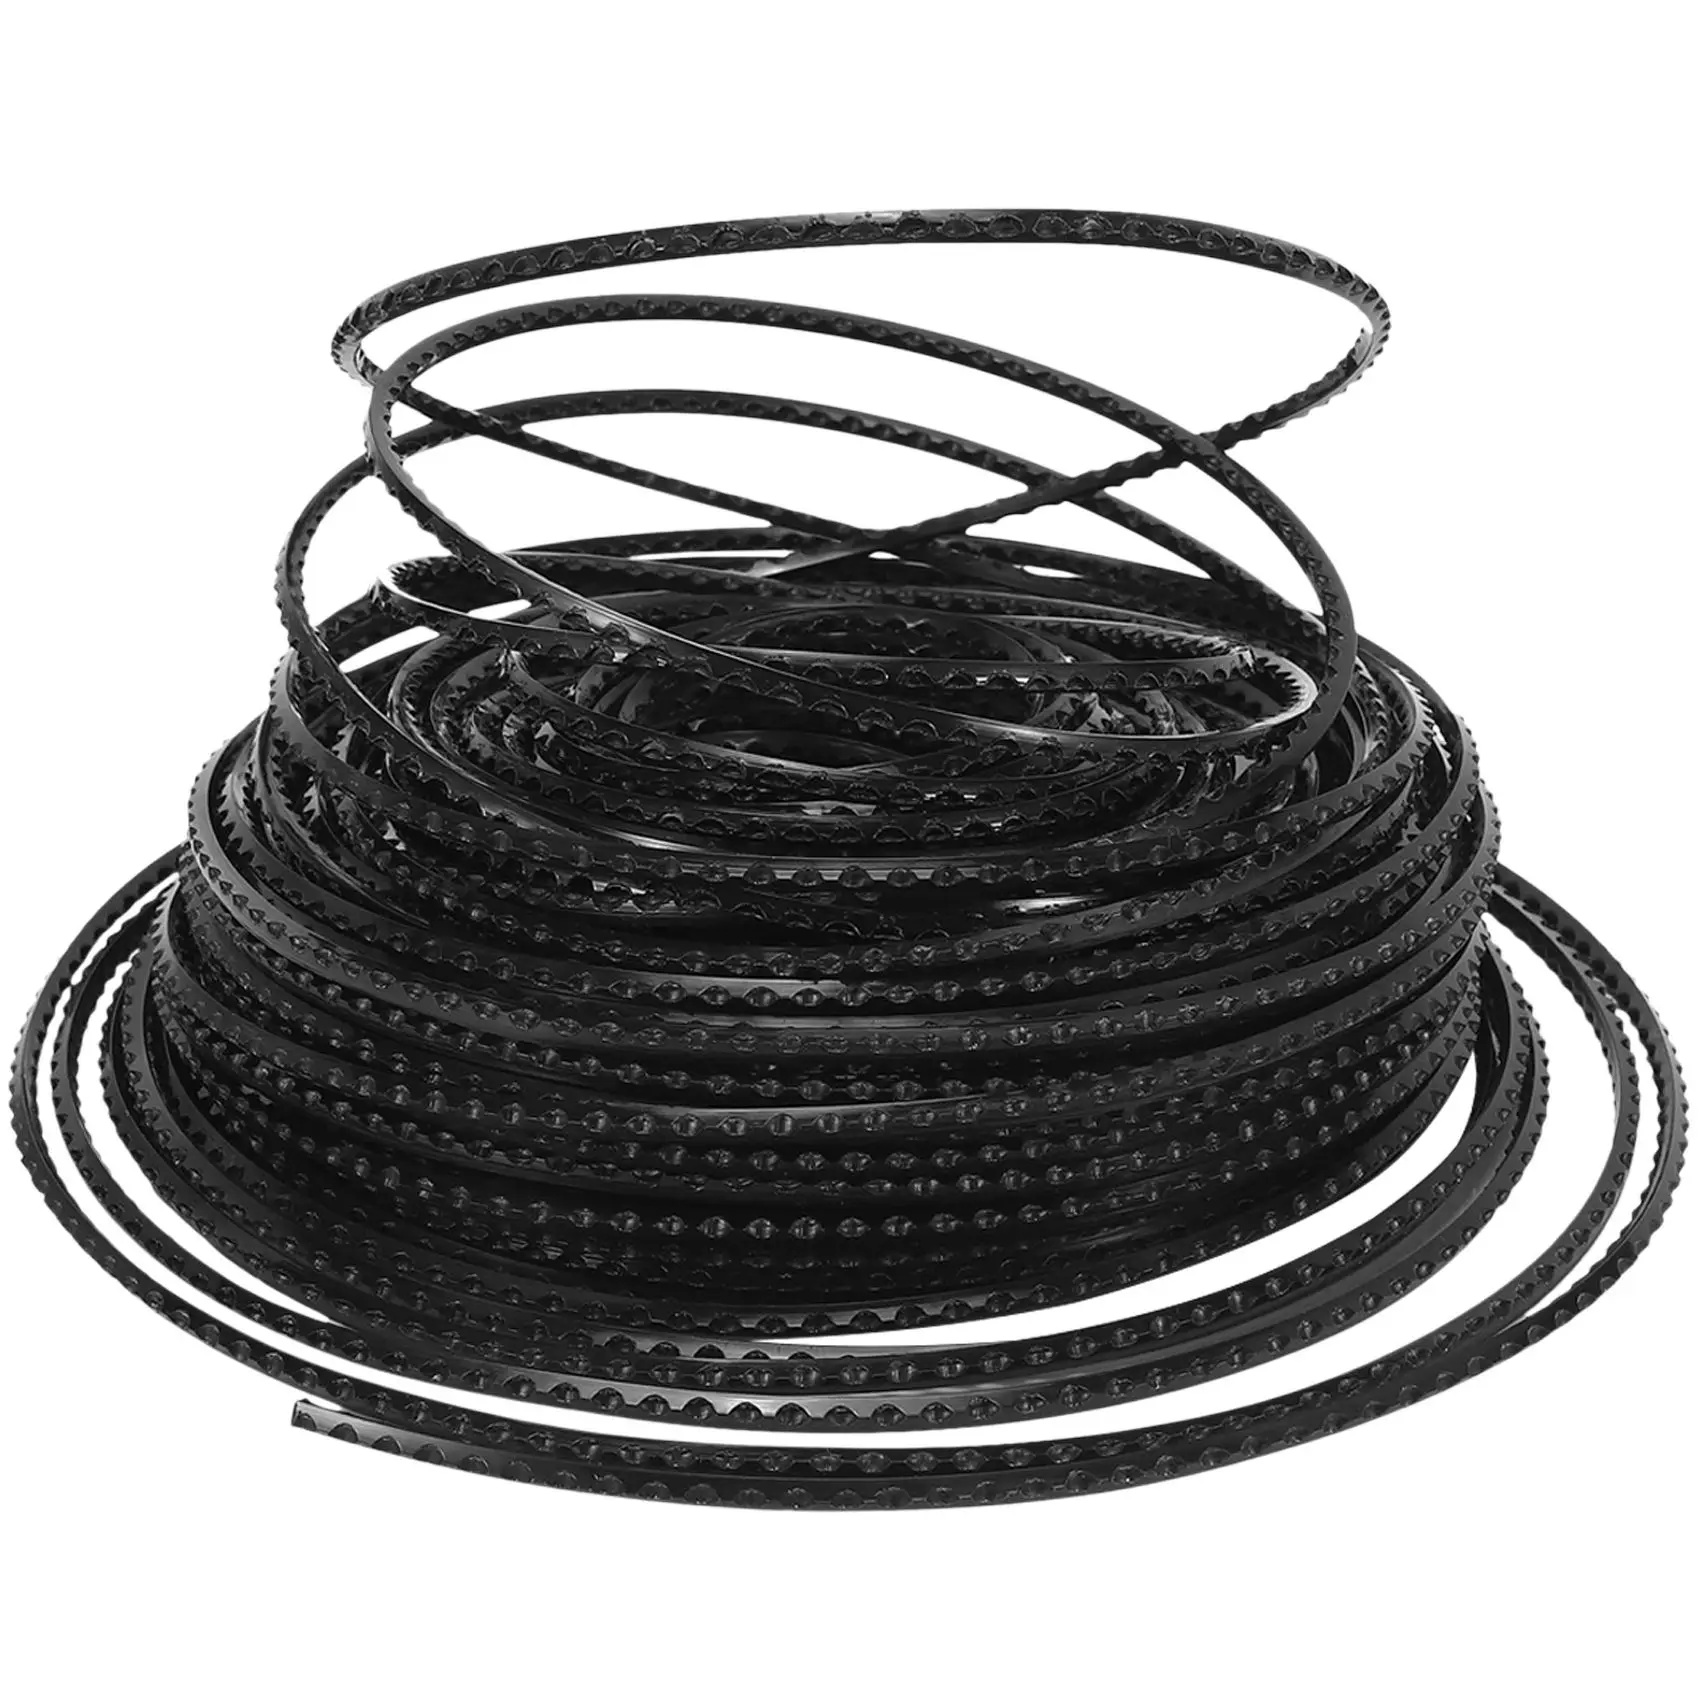 

Serrated Heavy Duty Trimmer Line, 3mm x 50M Nylon Strimmer Wire Low Noise Trimmer String for Over Grown Grass and Weeds